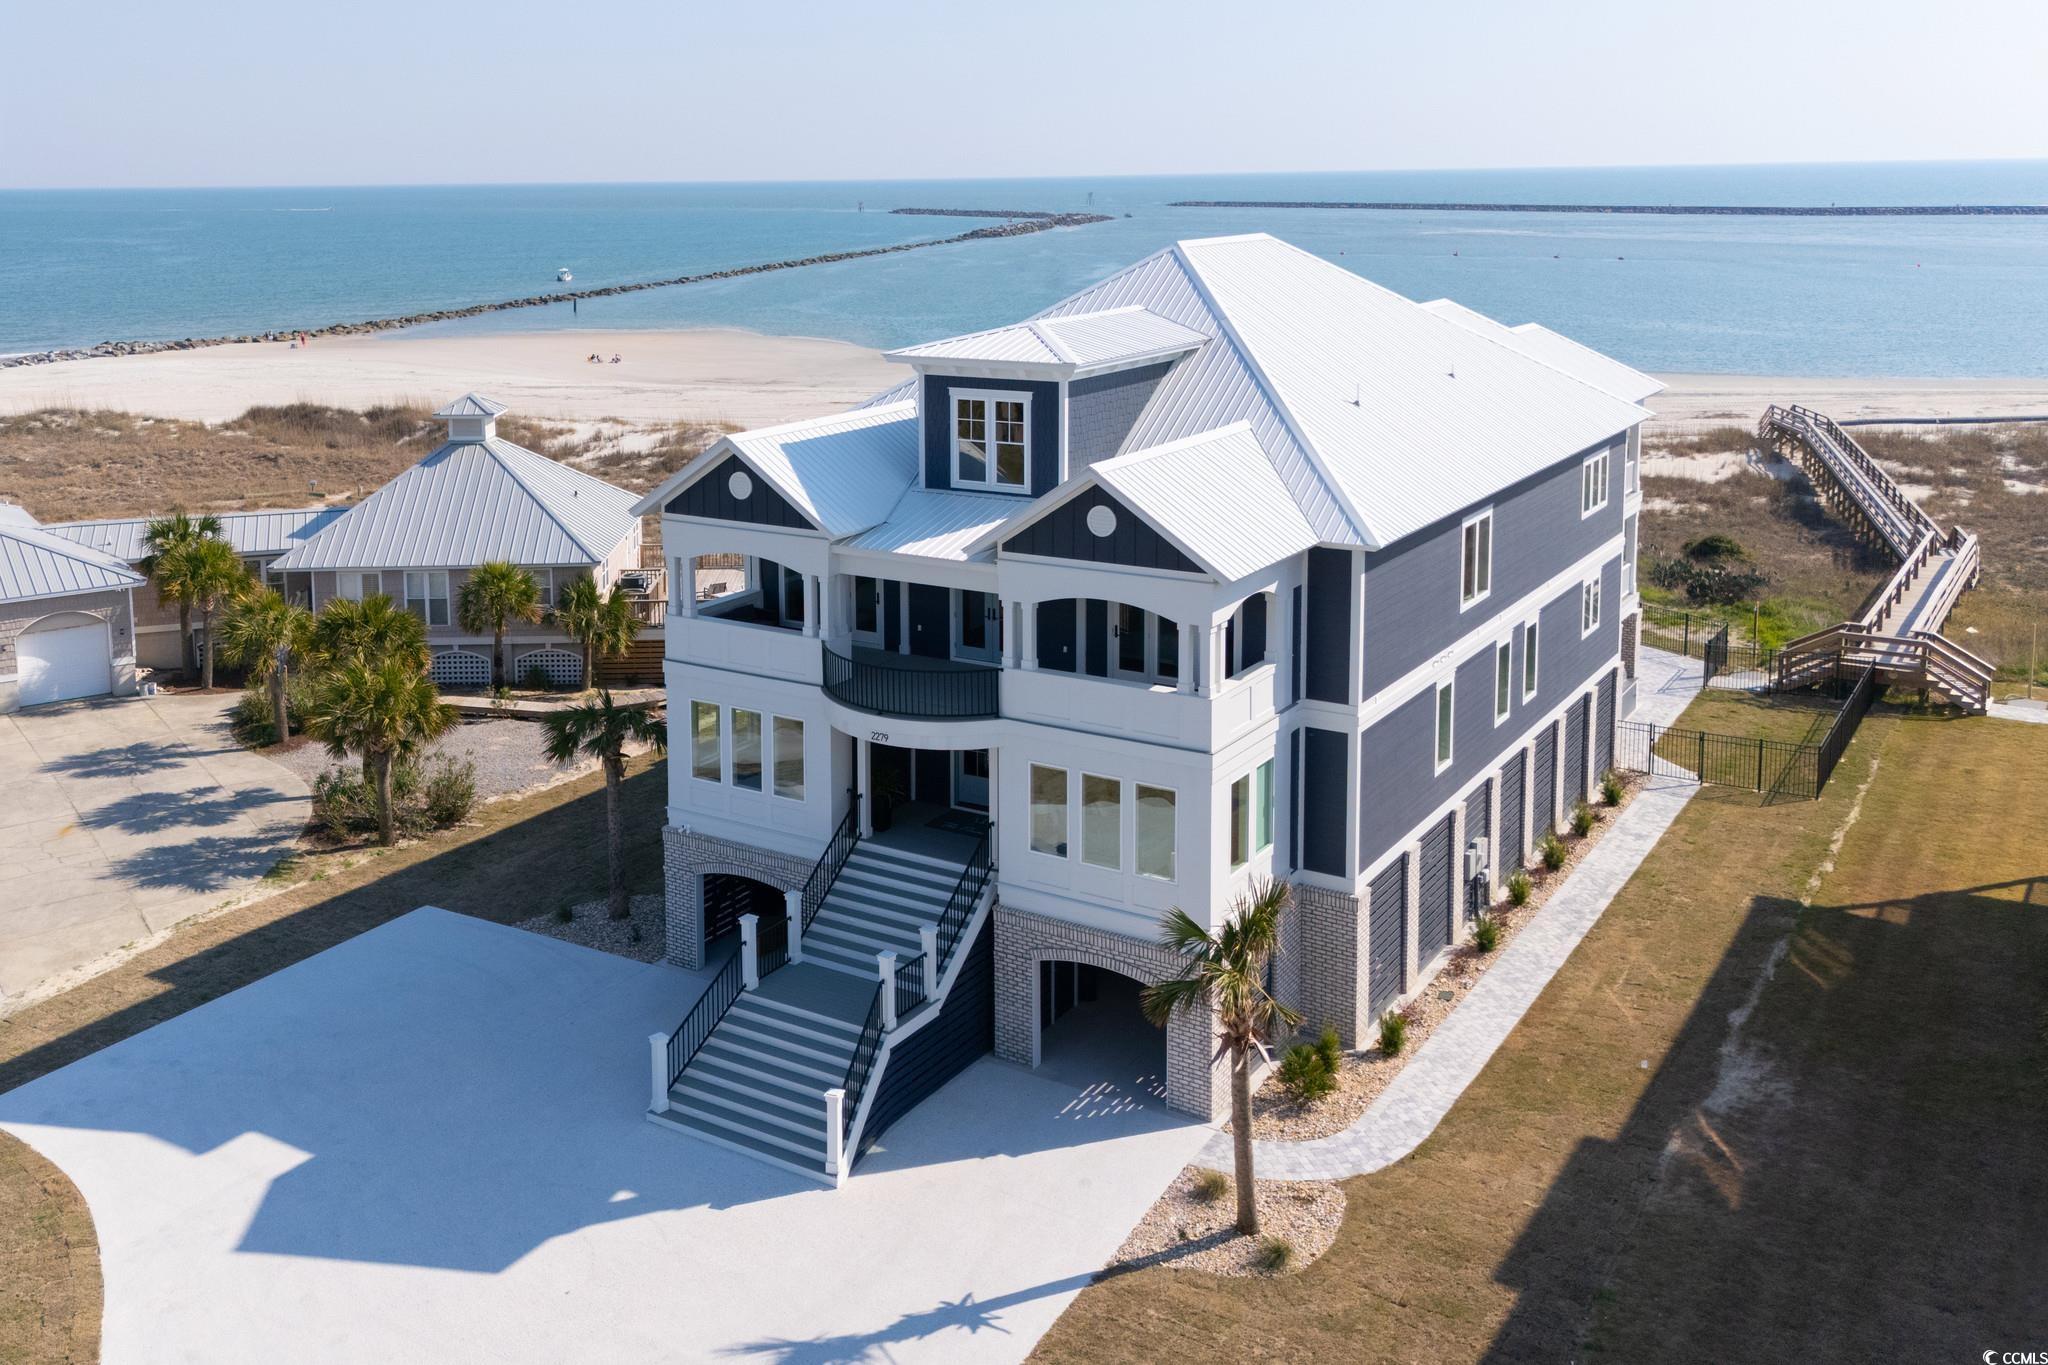 custom built 10 bedroom 10.2 bath 7000 sq. ft. luxury oceanfront new home currently under construction at lot 1 of the bluffs at inlet harbour. lot 1 is approximately a 28,000. sq.ft. of the highest elevation oceanfront property in south garden city with incomparable ocean and inlet views! this new home will be built to the latest wind load standards with standing seam black roof, spray foam insulation, commercial style kitchen with wolf and subzero professional series appliances in a reverse plan that allows for an oversized game/common area on the first floor with two large master bedrooms and large oceanfront decks overlooking the pool area with outside kitchen. the oversized family room and kitchen/dining room is found on the 2nd floor along with a massive master bedroom suite all set up to achieve spectacular unencumbered views! the outside area will have a large oceanside heated pool, with hot tub and tanning deck serviced by a large outside kitchen and shower area. unrivaled design matched up with superior construction and fully outfitted and tastefully furnished with decor appropriate for its station.